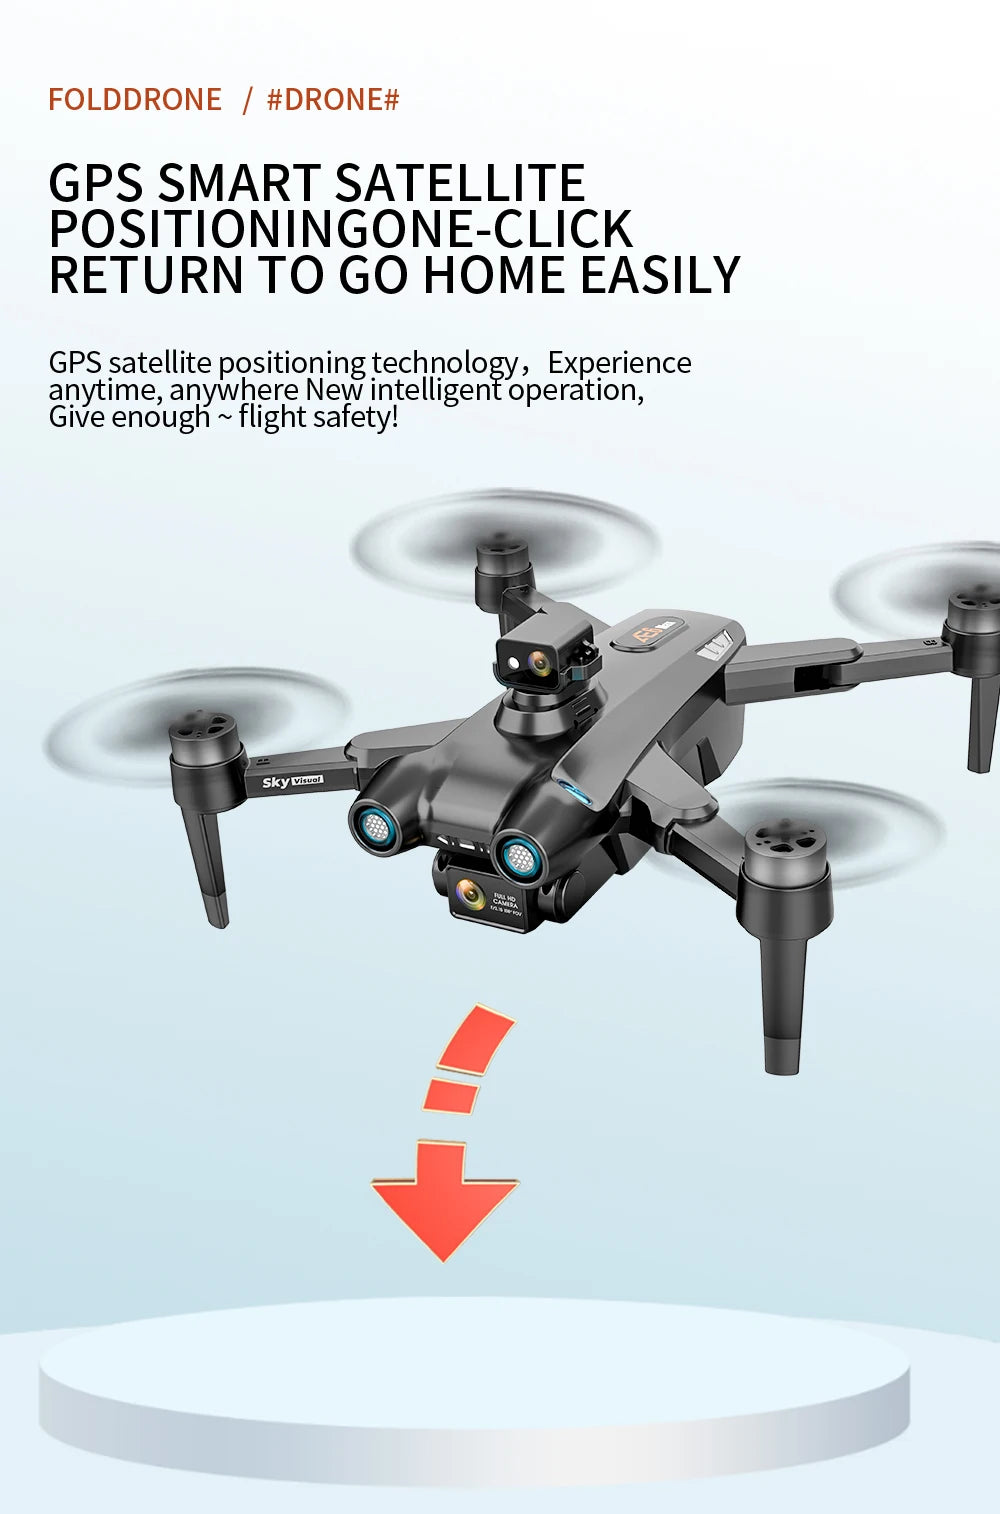 New AE6 / AE6 Max Drone, GPS satellite positioning iteclgecgo Experience anytime, anywhere Nevi 'operation